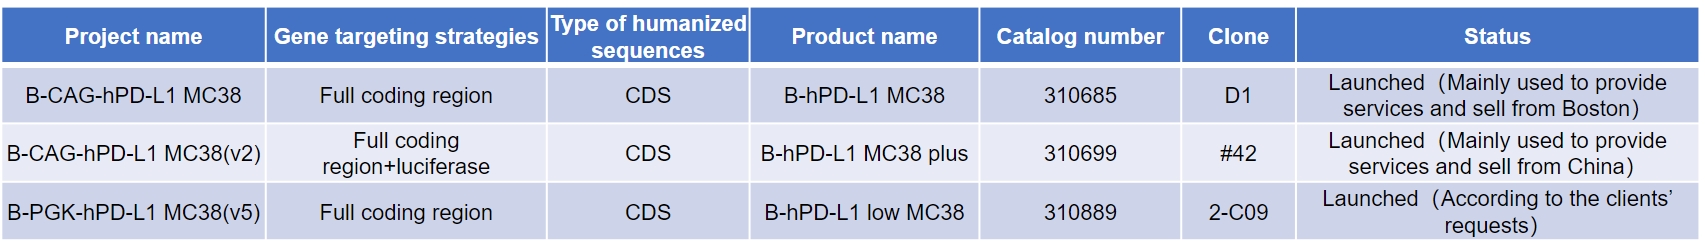 PD-L1 humanized MC38 cell lines